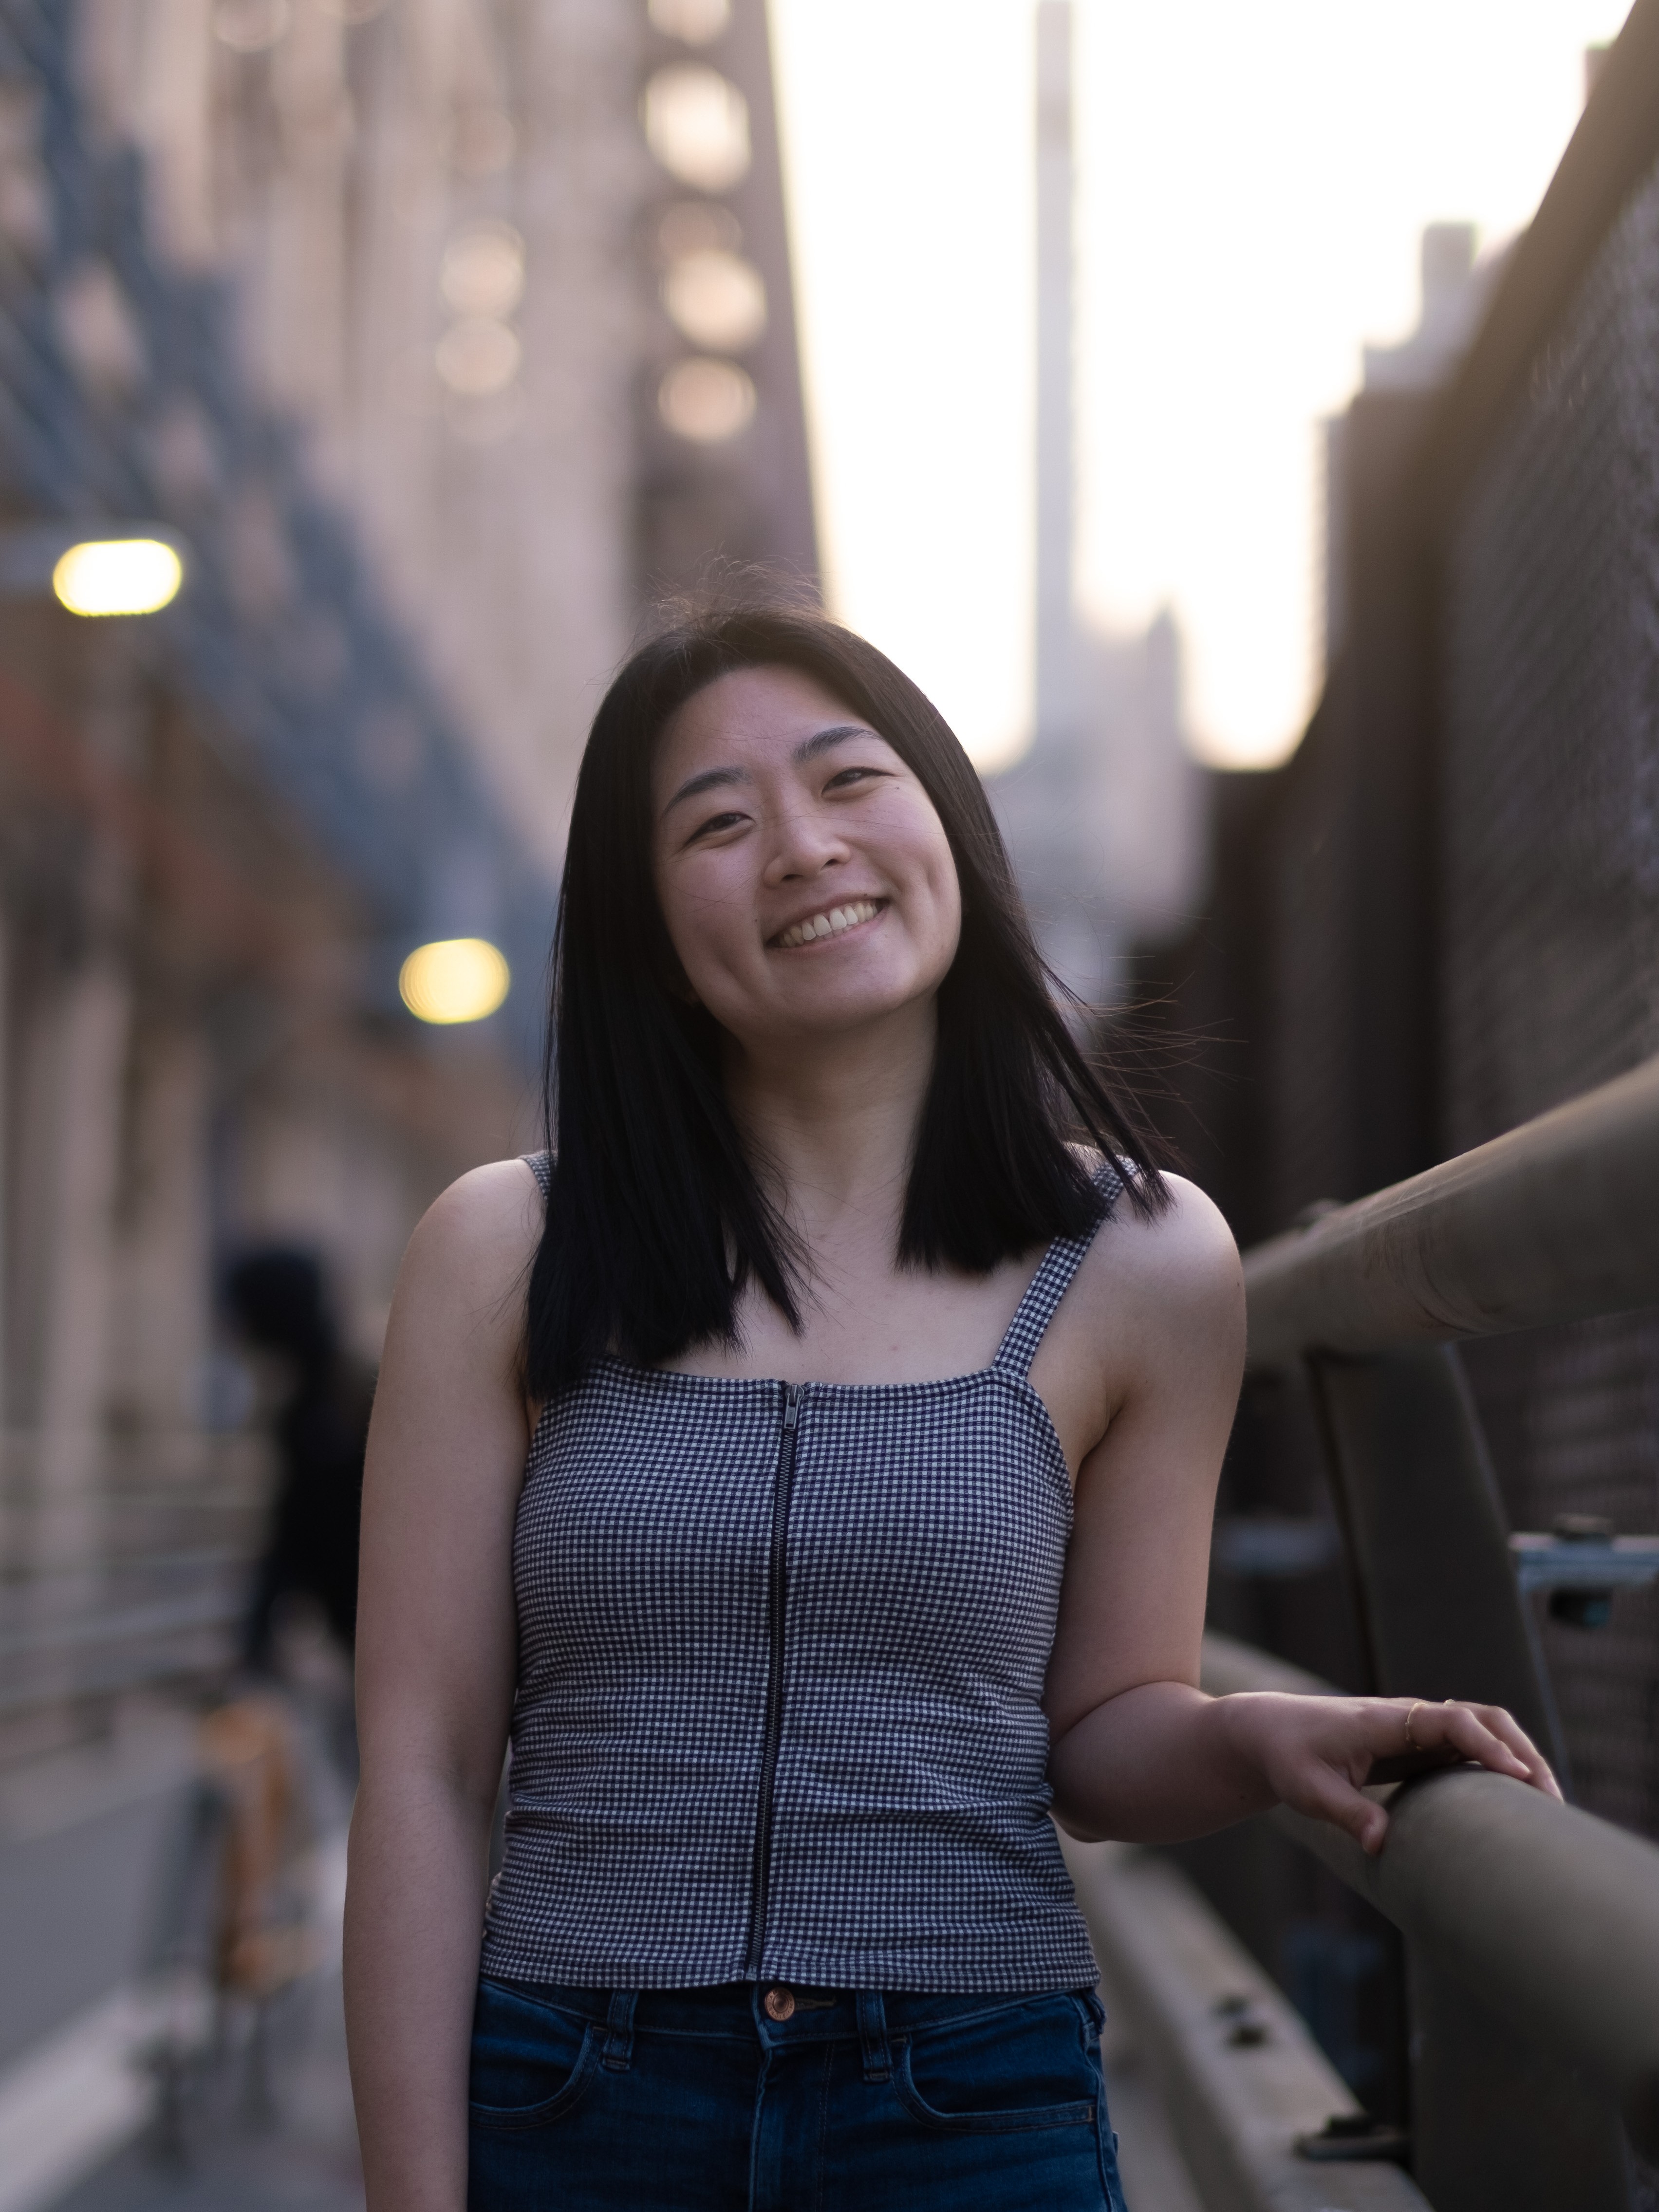 Emma was born in Taiwan but grew up in California where she studied Electrical Engineering and Computer Science at UC Berkeley. Before moving to NYC, she was in Seattle working as a software engineer. In her free time, she enjoys playing tennis, baking/cooking, and going on long walks.